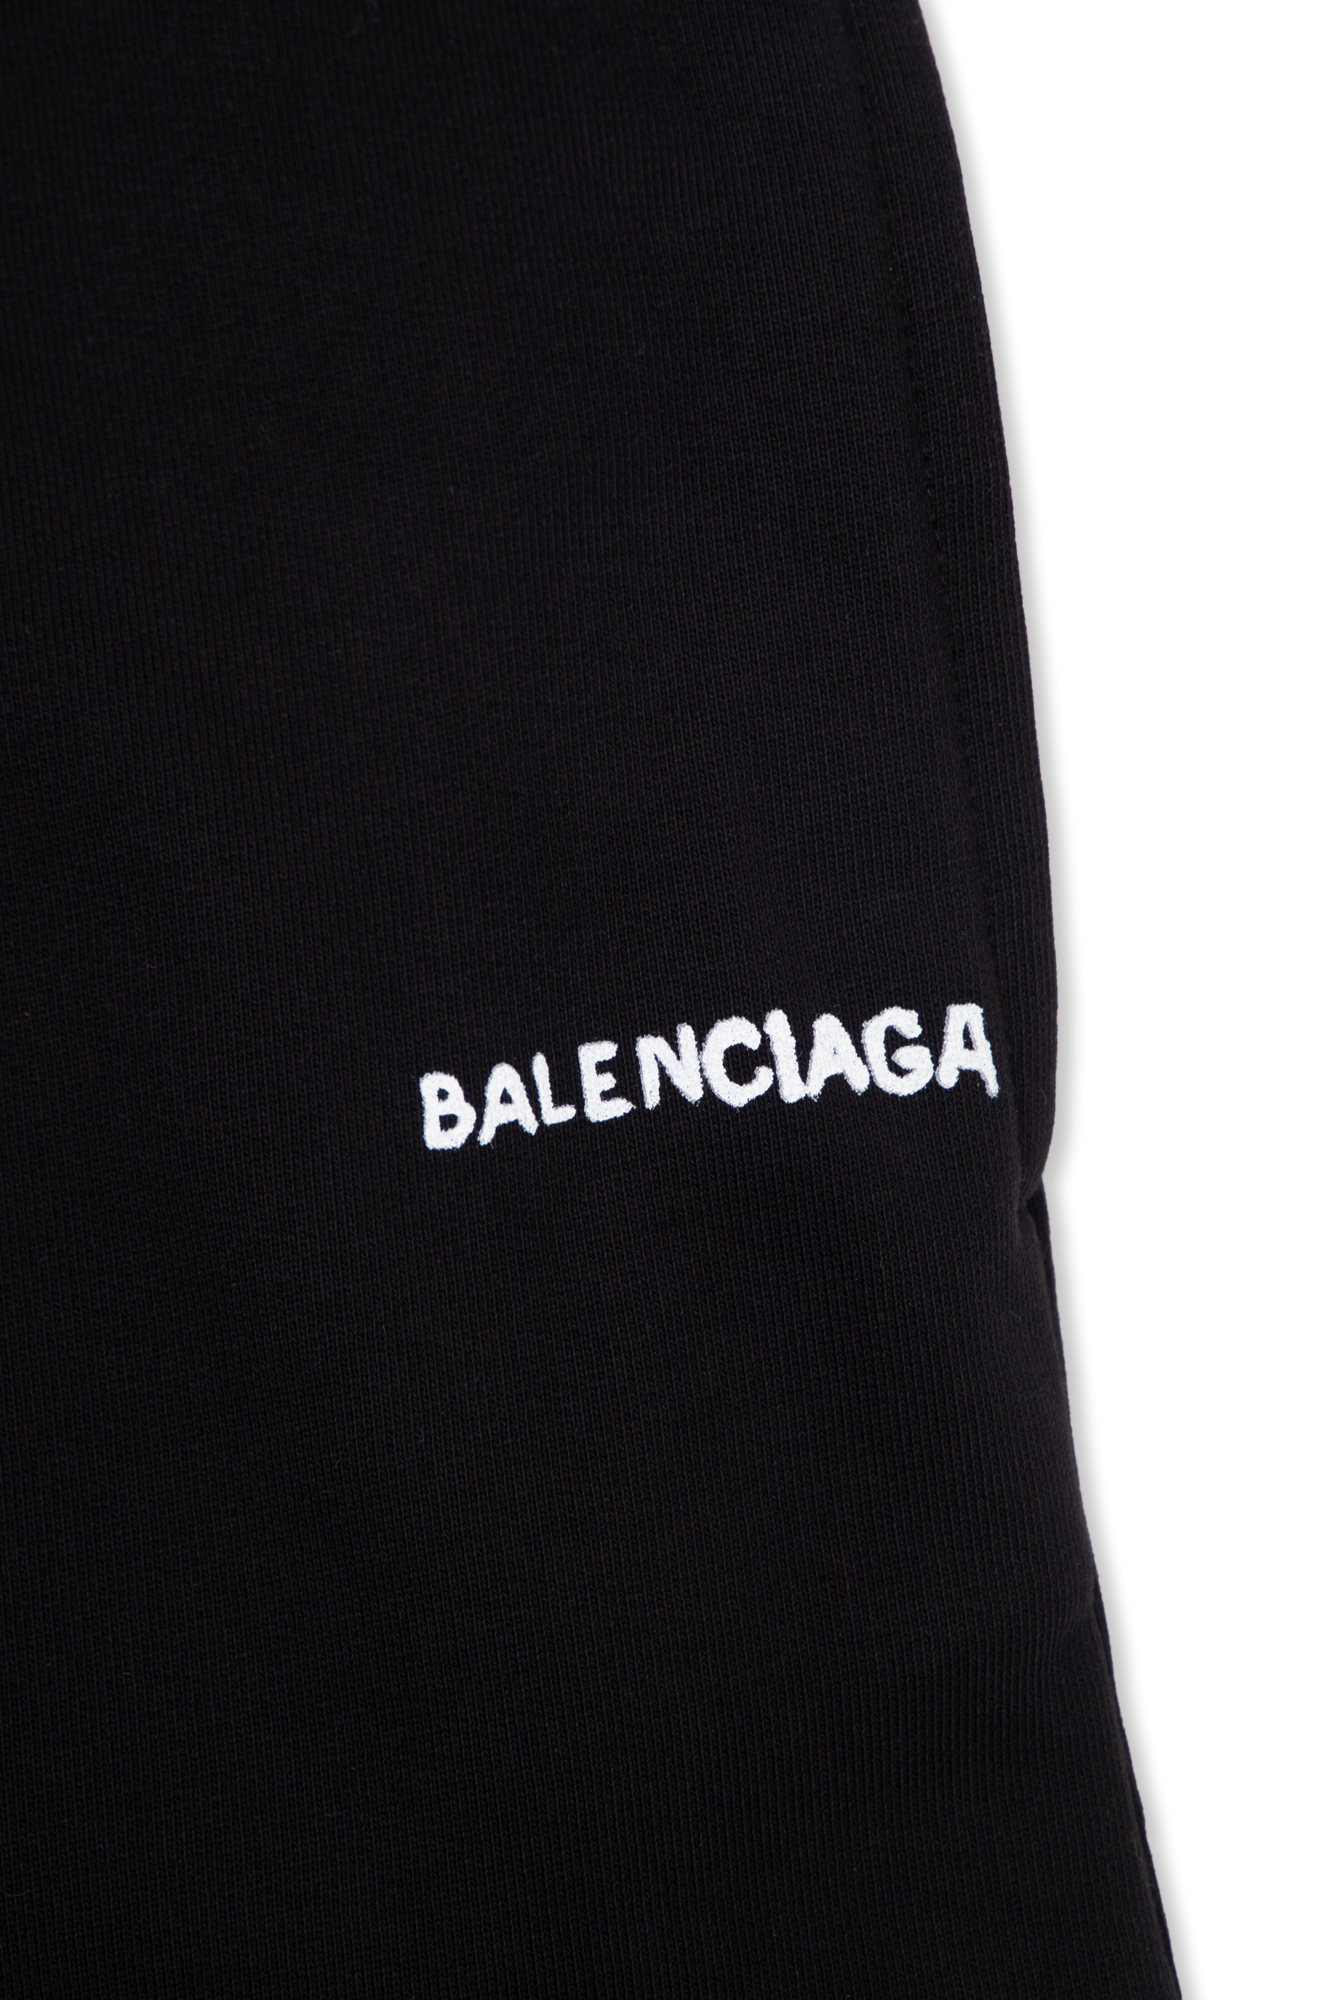 Balenciaga Kids Long Black Dress With Long Translucent Sleeves And Rear Tear Opening